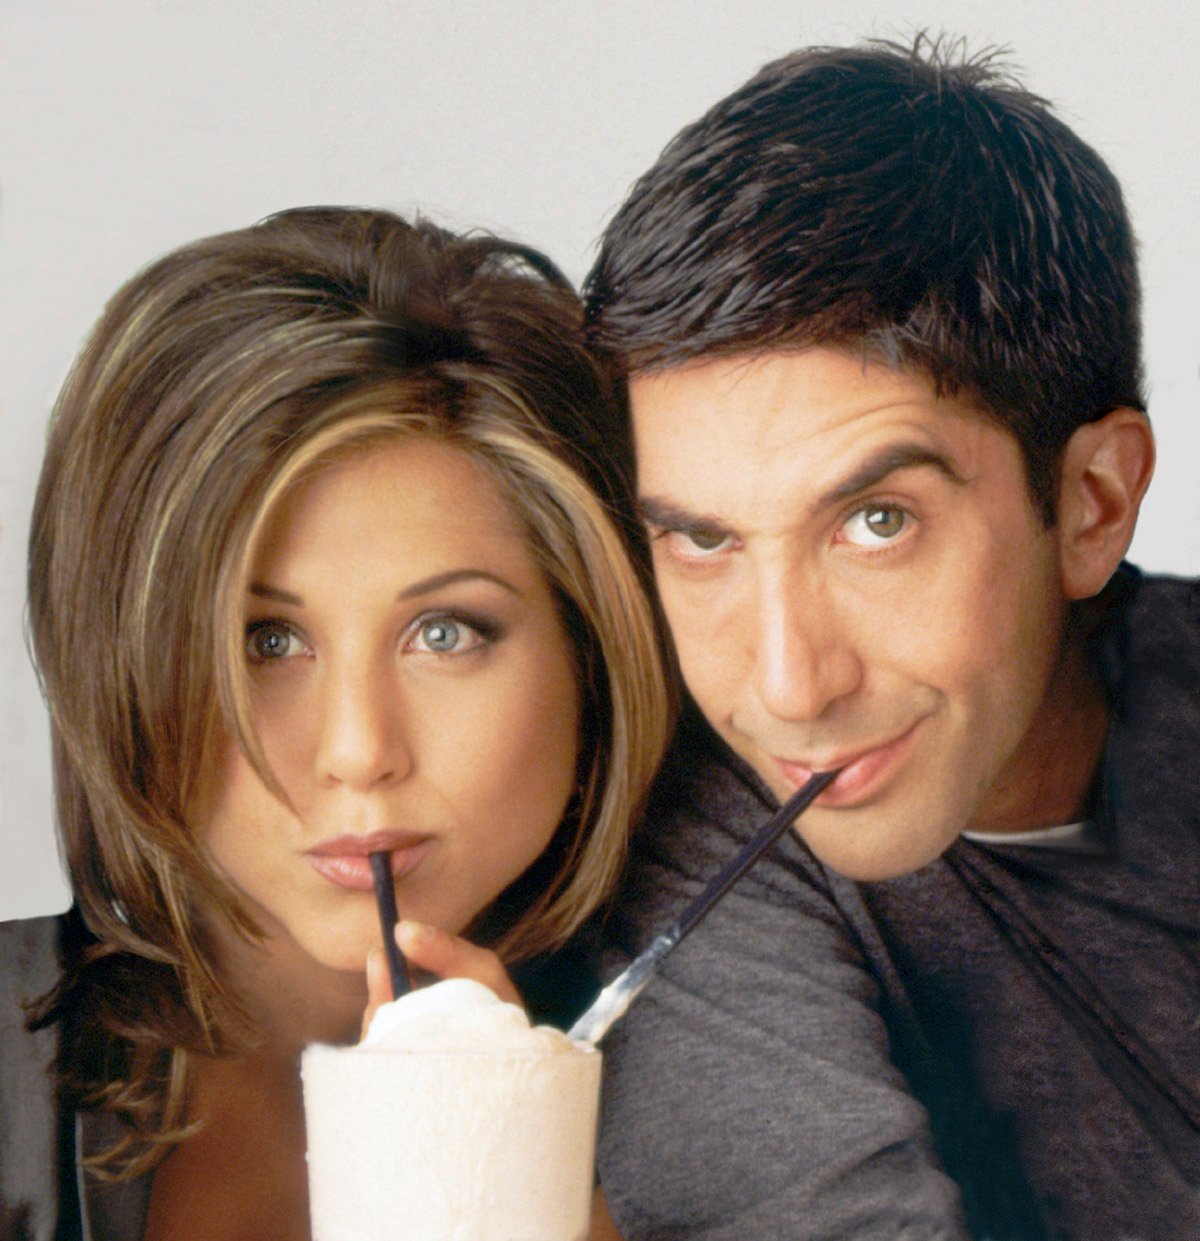 David Schwimmer as Ross and Jennifer Aniston as Rachel share one milkshake with two straws.